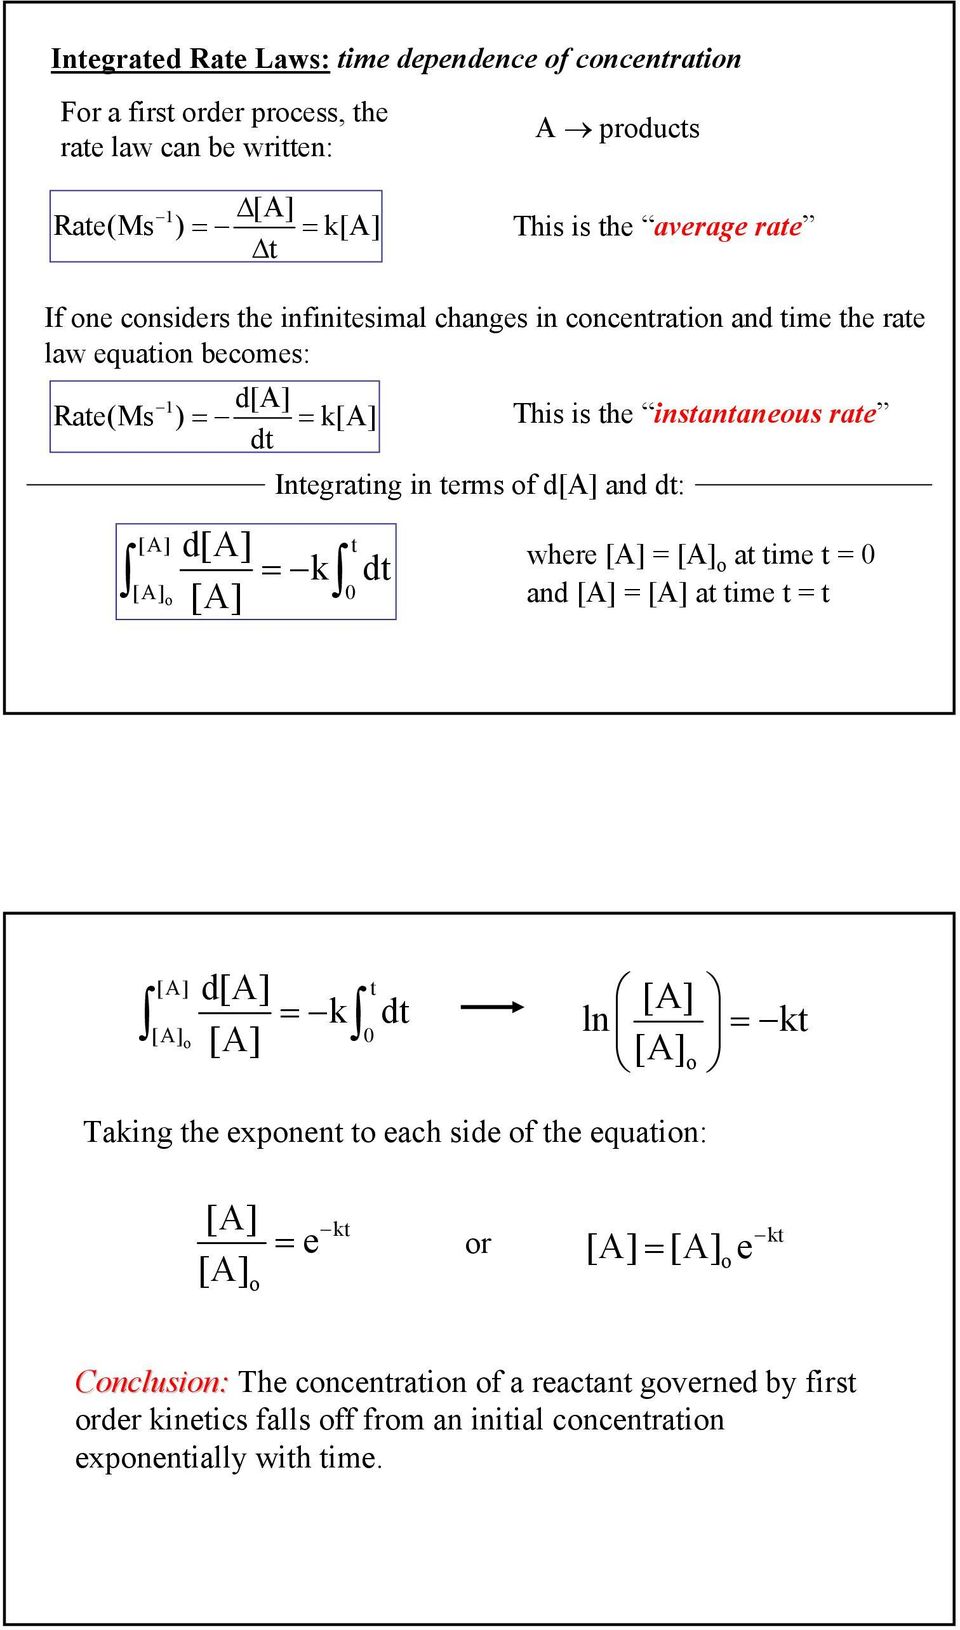 Integrating in terms of d and dt: d t = k dt where = o at time t = 0 and = at time t = t 0 o d t = k dt ln o = kt Taking the exponent to each side of the